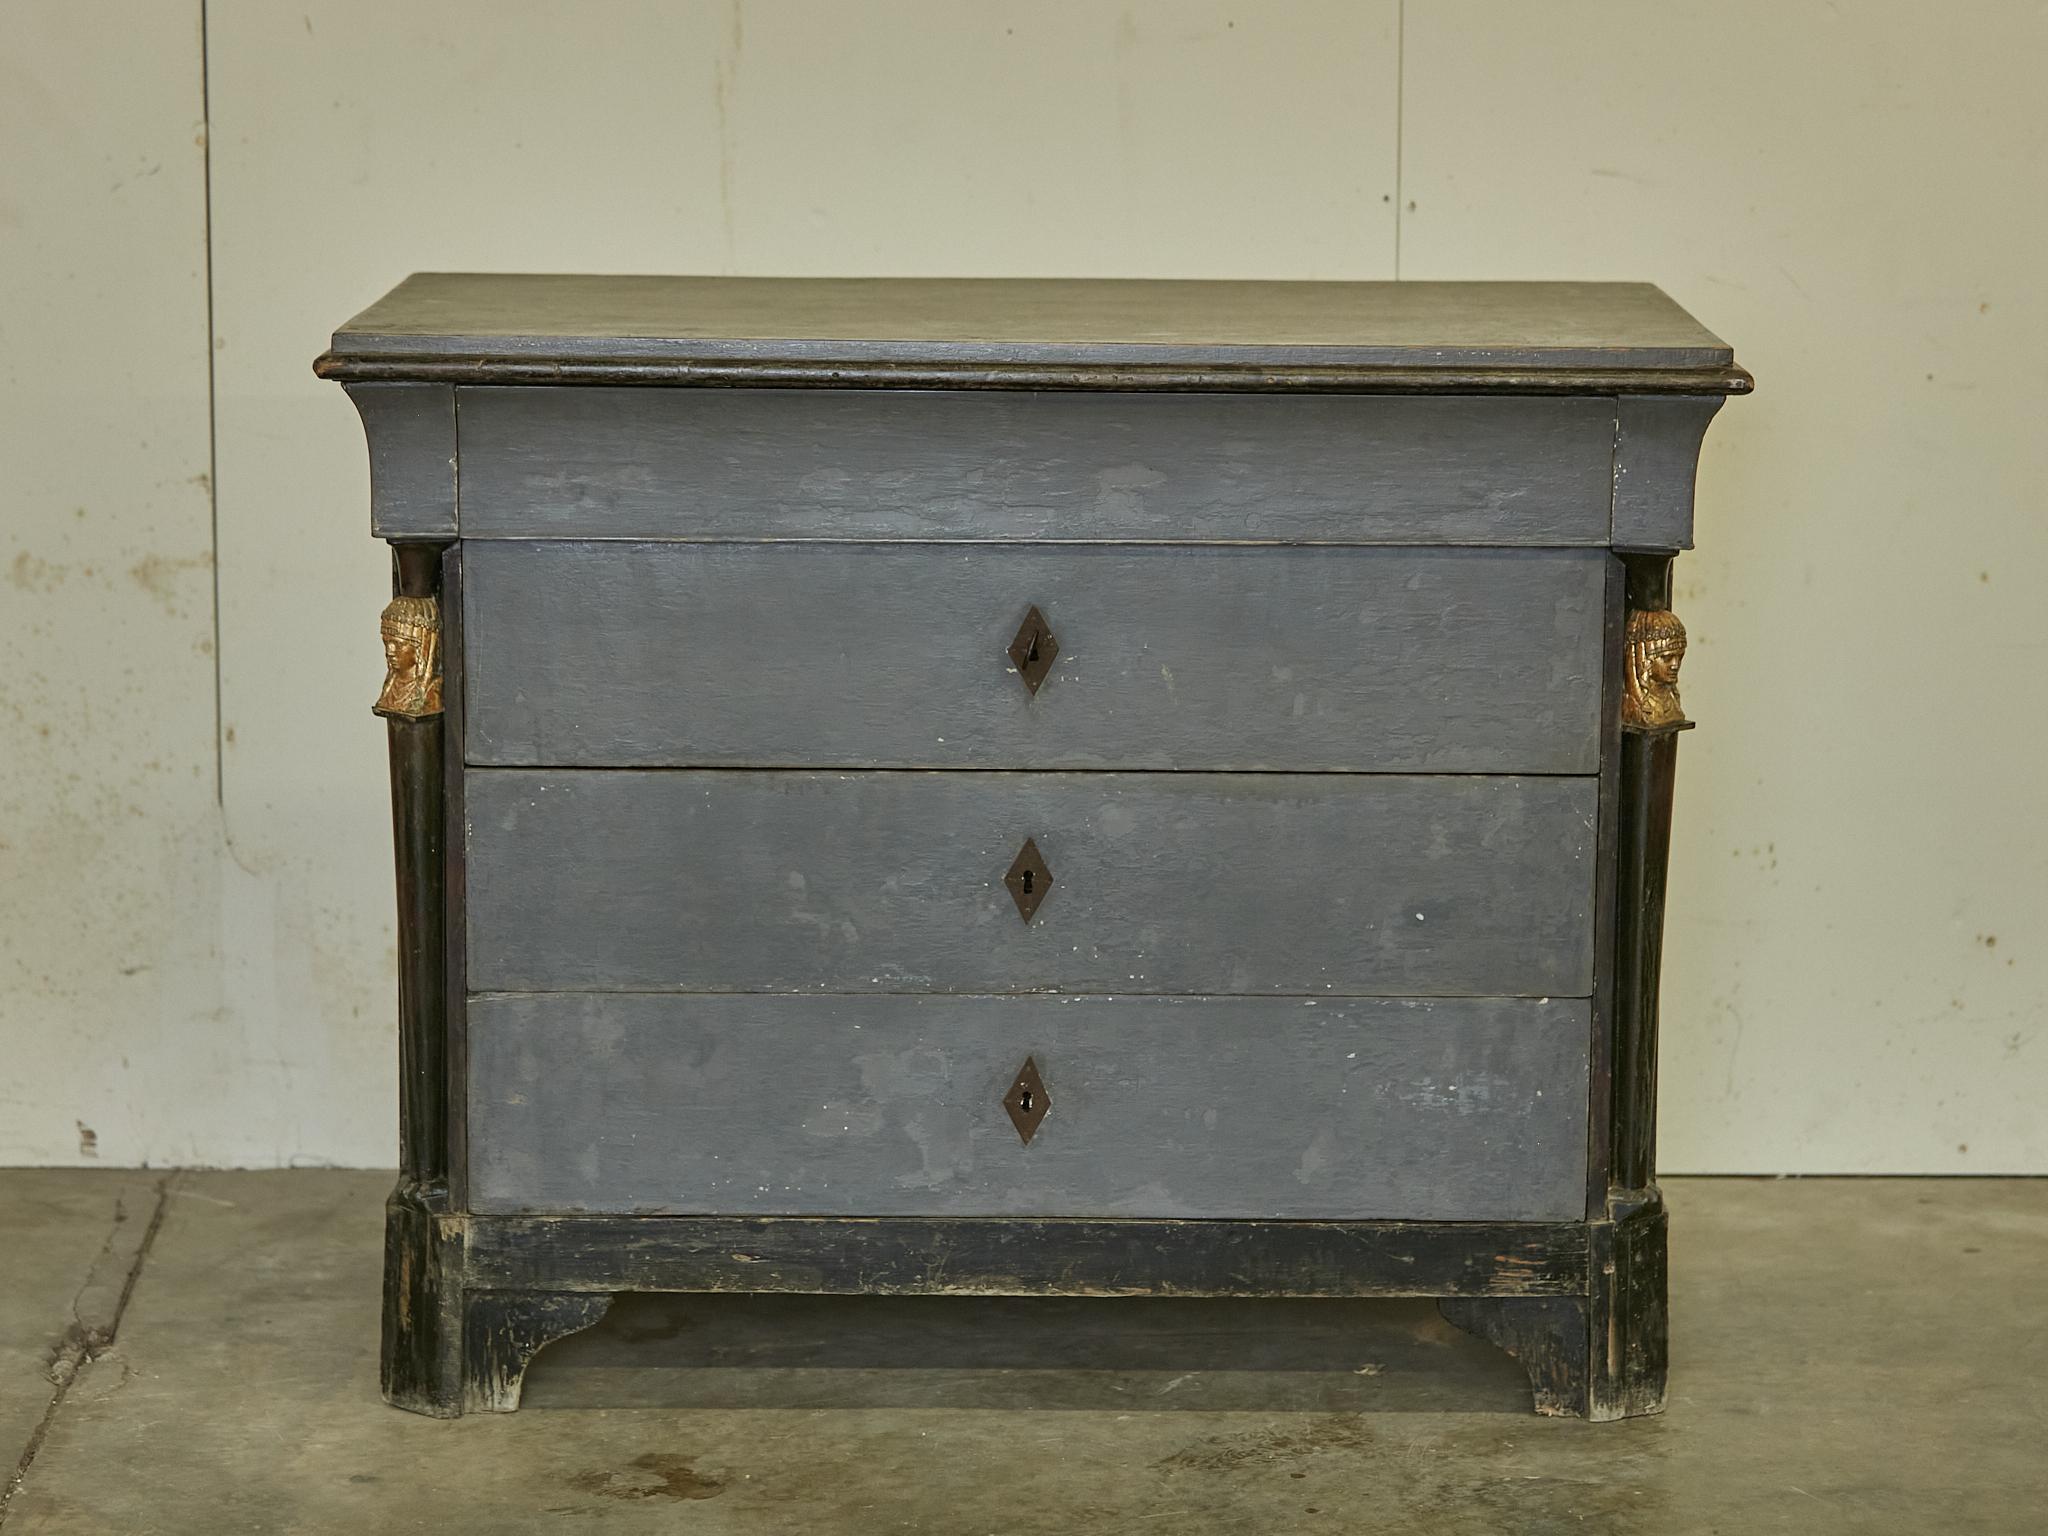 A French Empire style painted wood four-drawer commode from the 19th century with ebonized columns, carved giltwood female busts and bracket feet. Step into an era of refined elegance with this exquisite French Empire style painted wood four-drawer